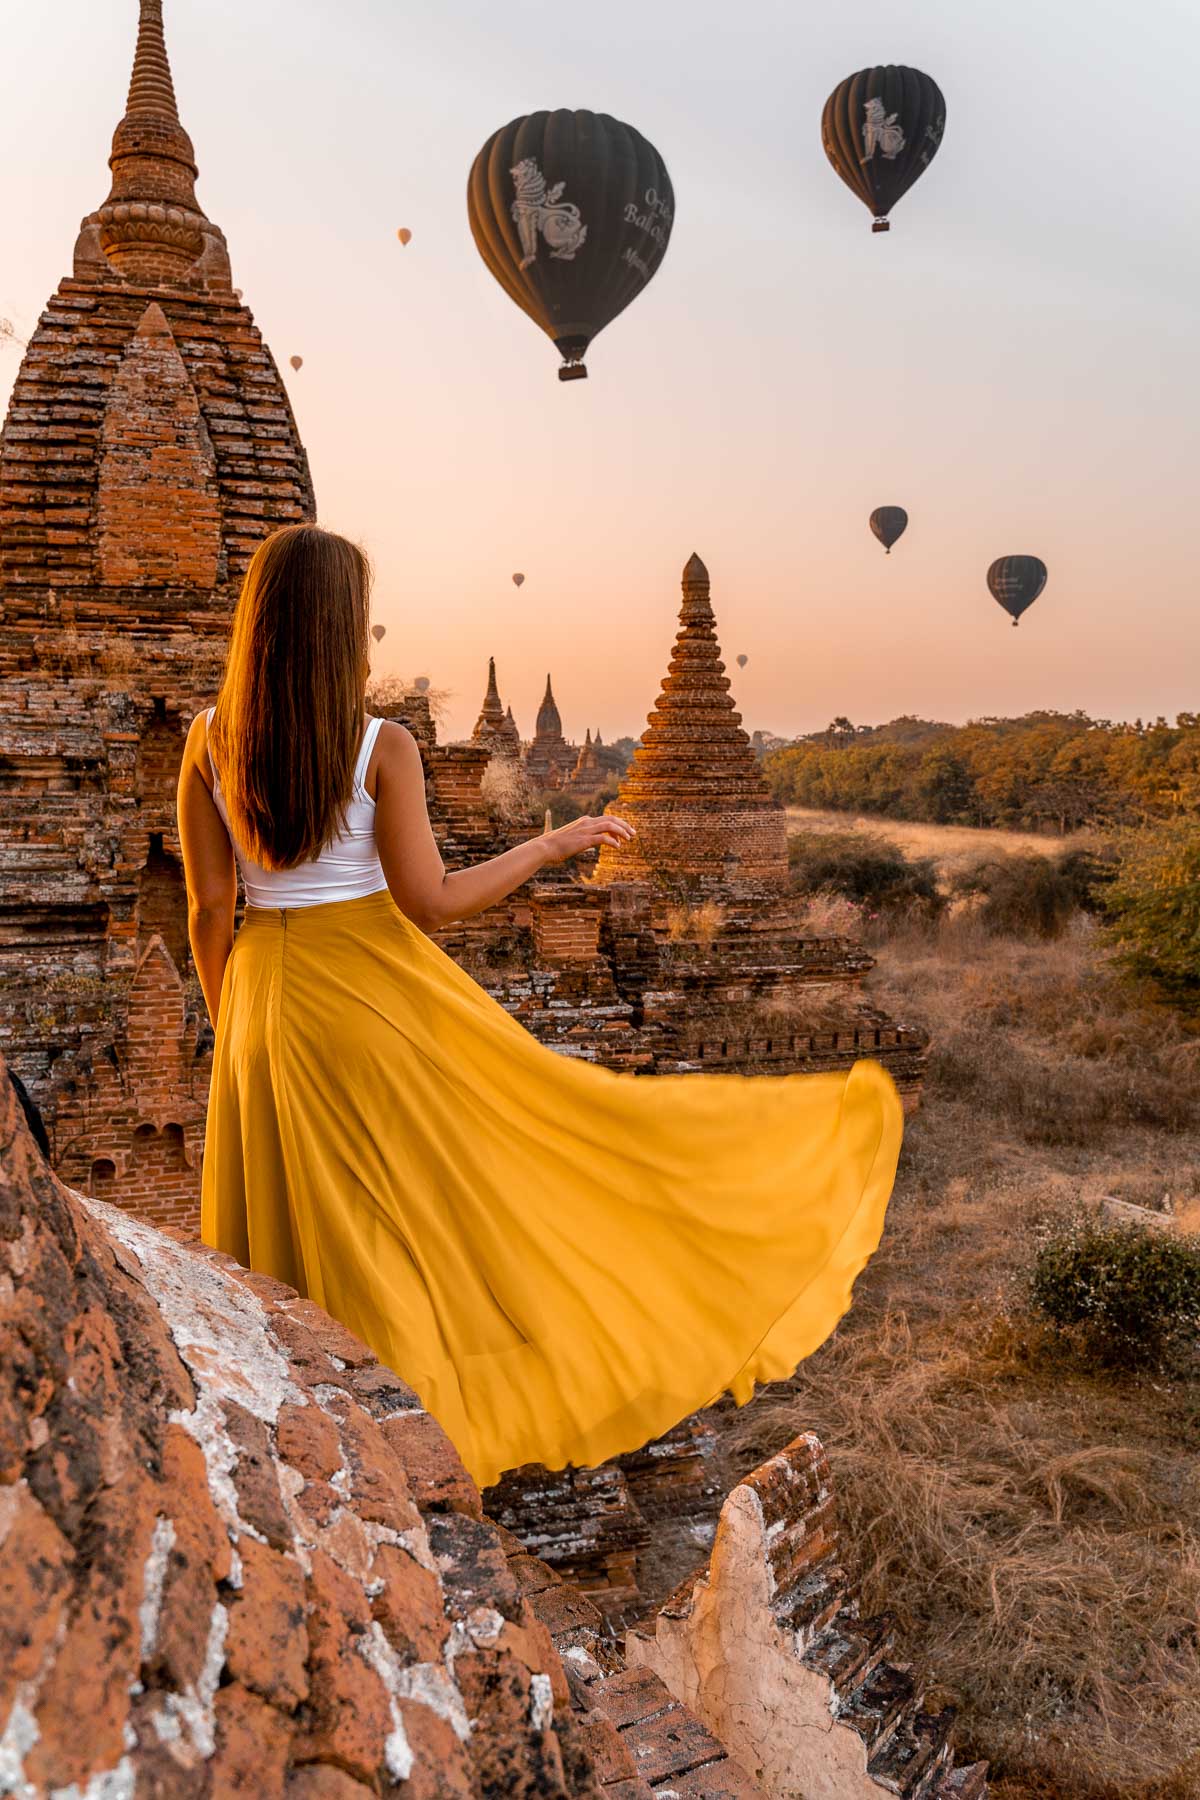 Girl in a yellow dress watching the hot air balloons at sunrise in Bagan, Myanmar